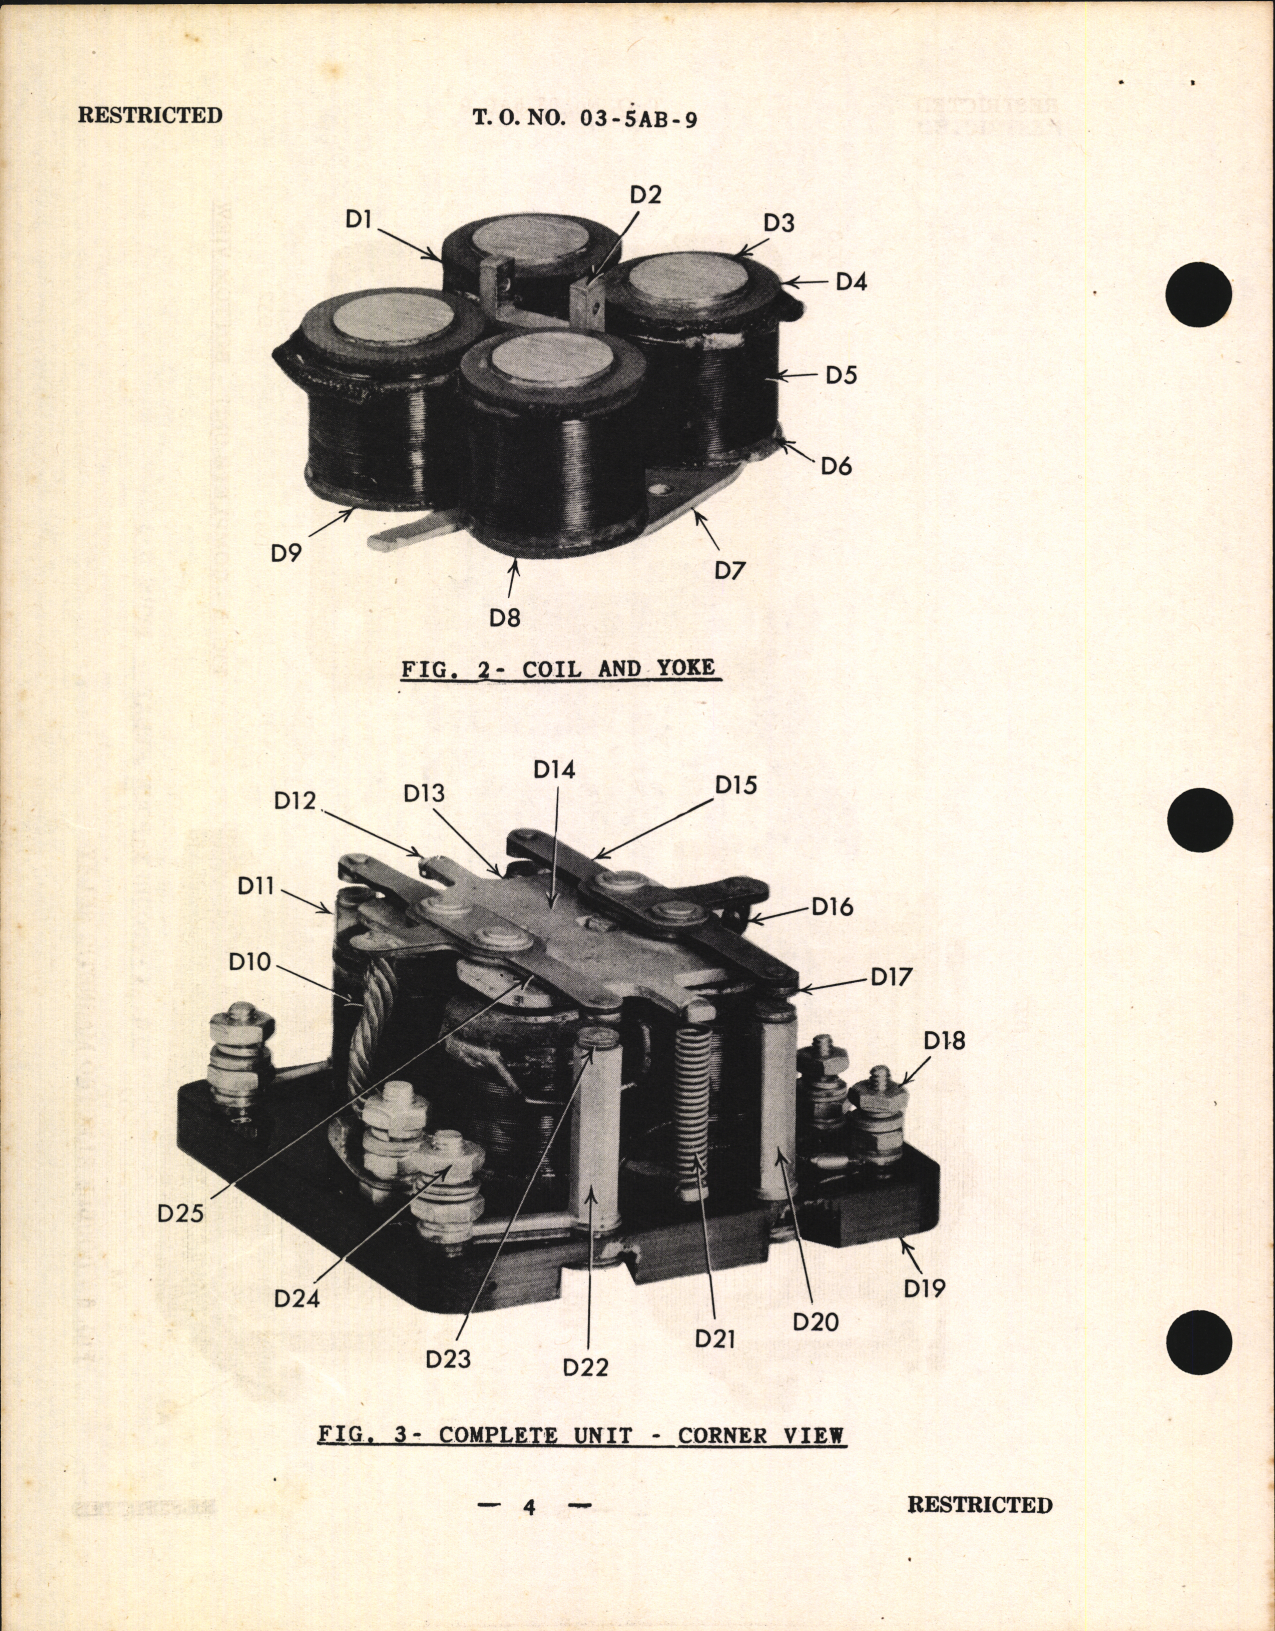 Sample page 6 from AirCorps Library document: Handbook of Instructions with Parts Catalog for Double Relay Type B-3